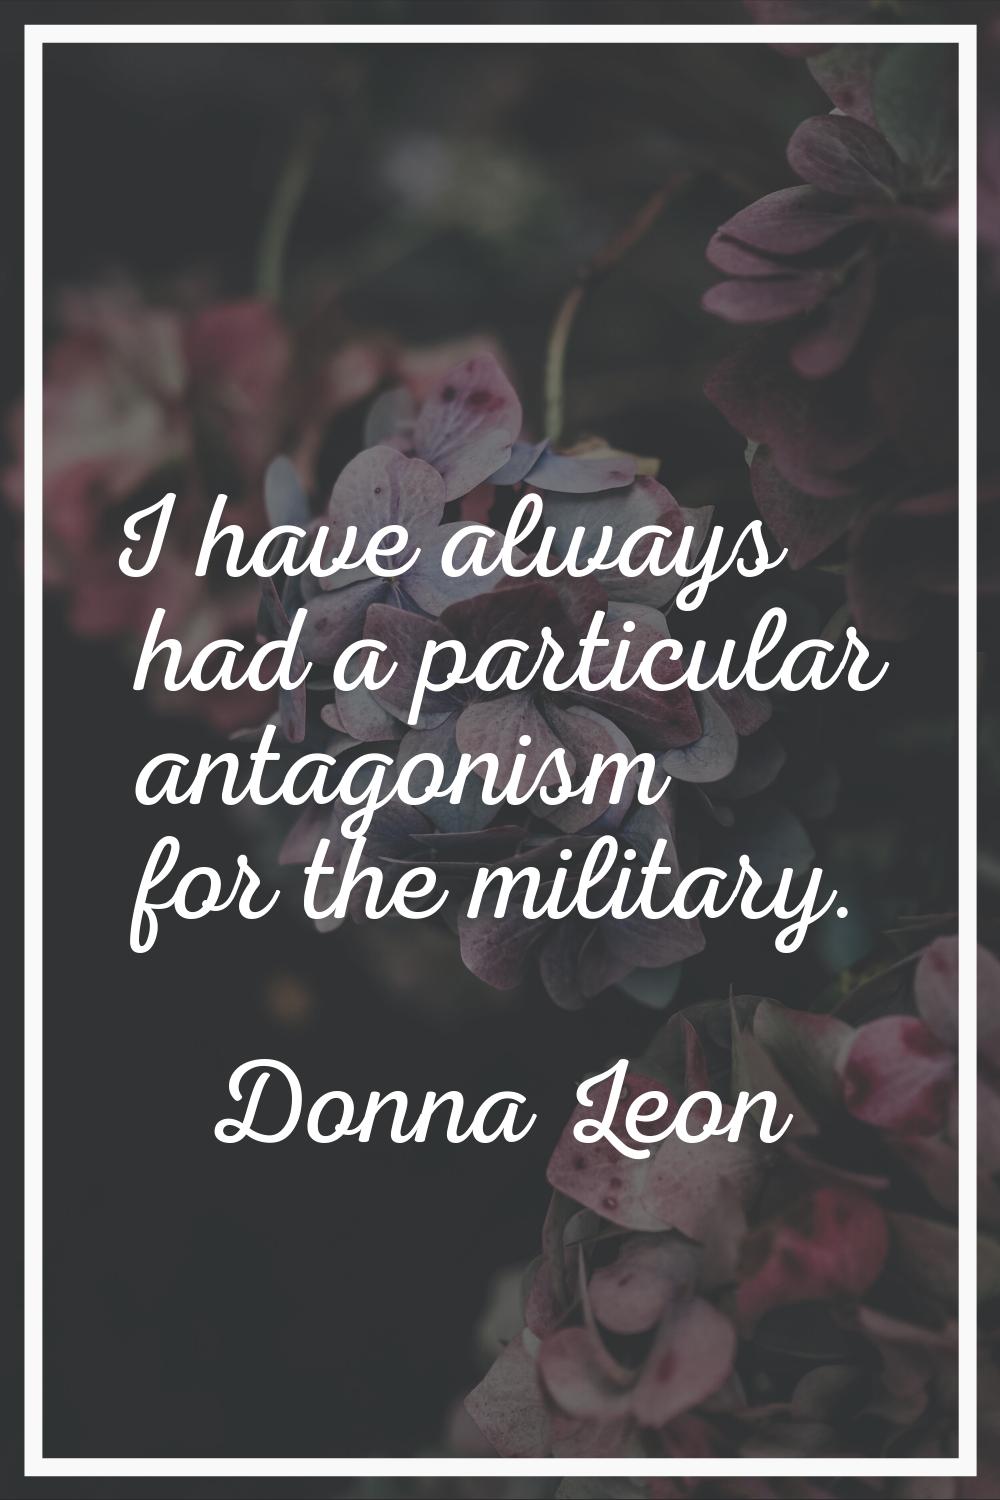 I have always had a particular antagonism for the military.